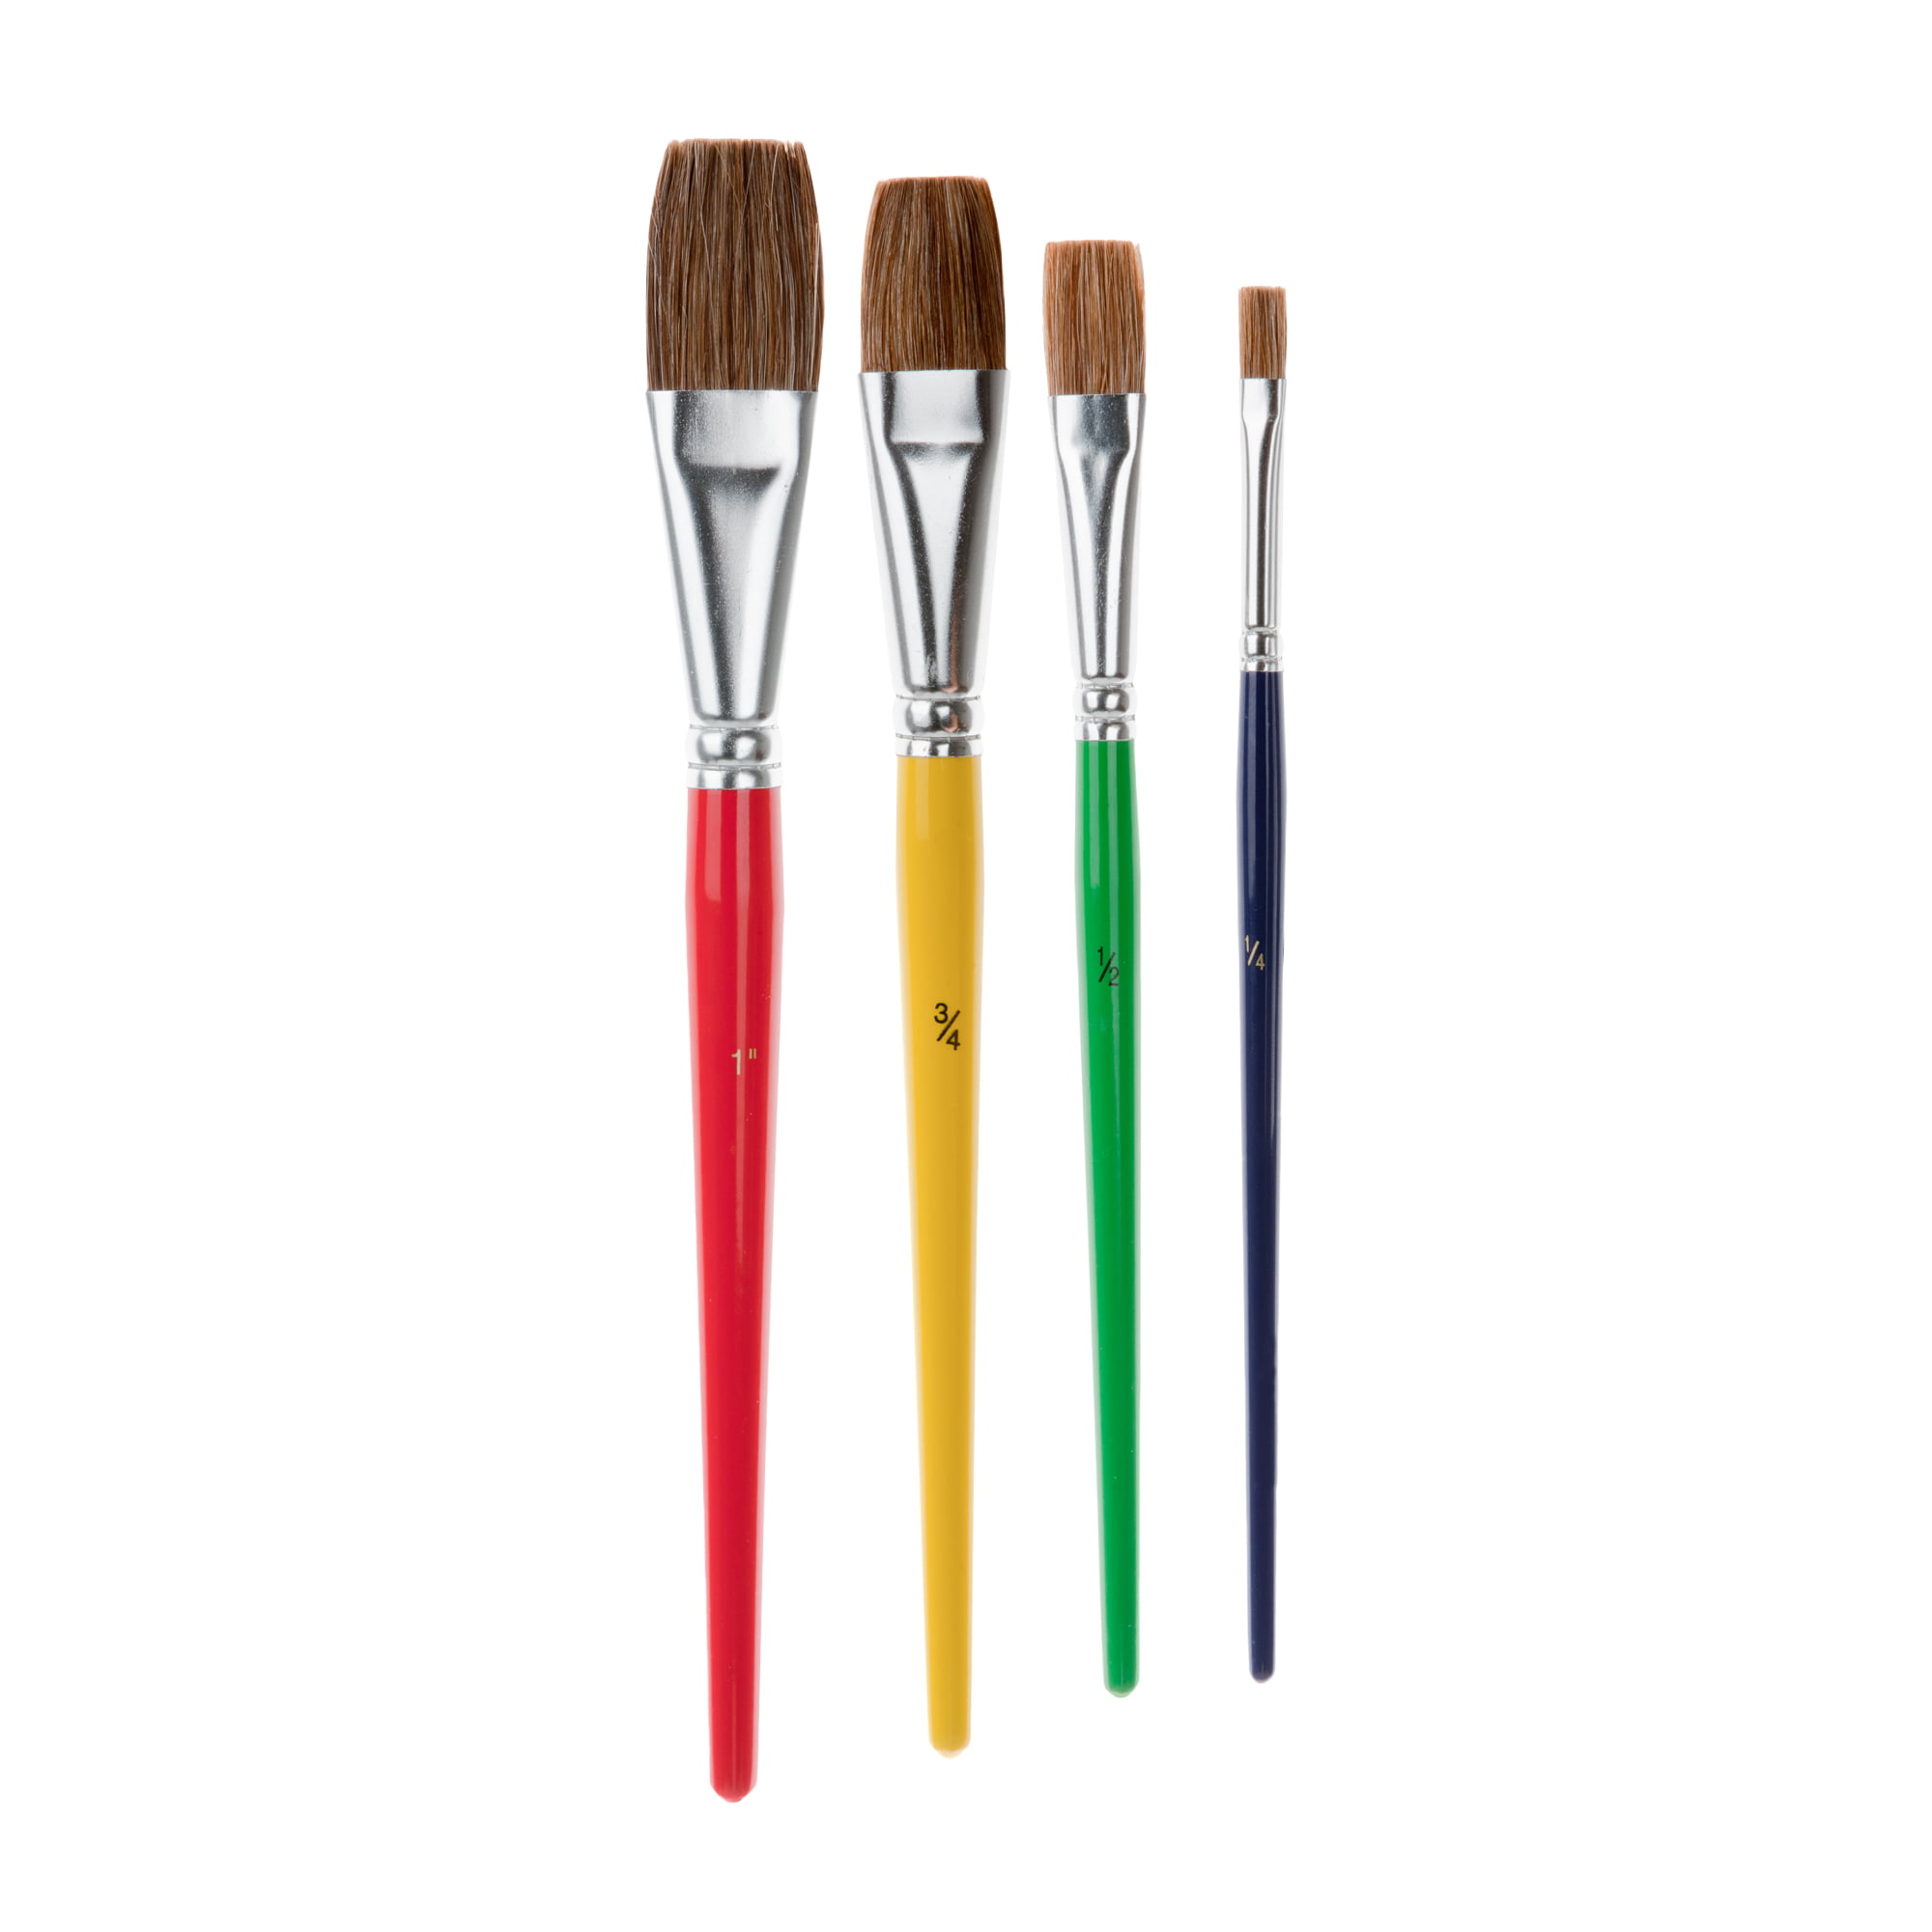 First Impressions Really Good School Painting Brushes - Sableline Bristle Brushes for Tempera, Watercolor, Acrylics, & More! - Round Set of 30, Other